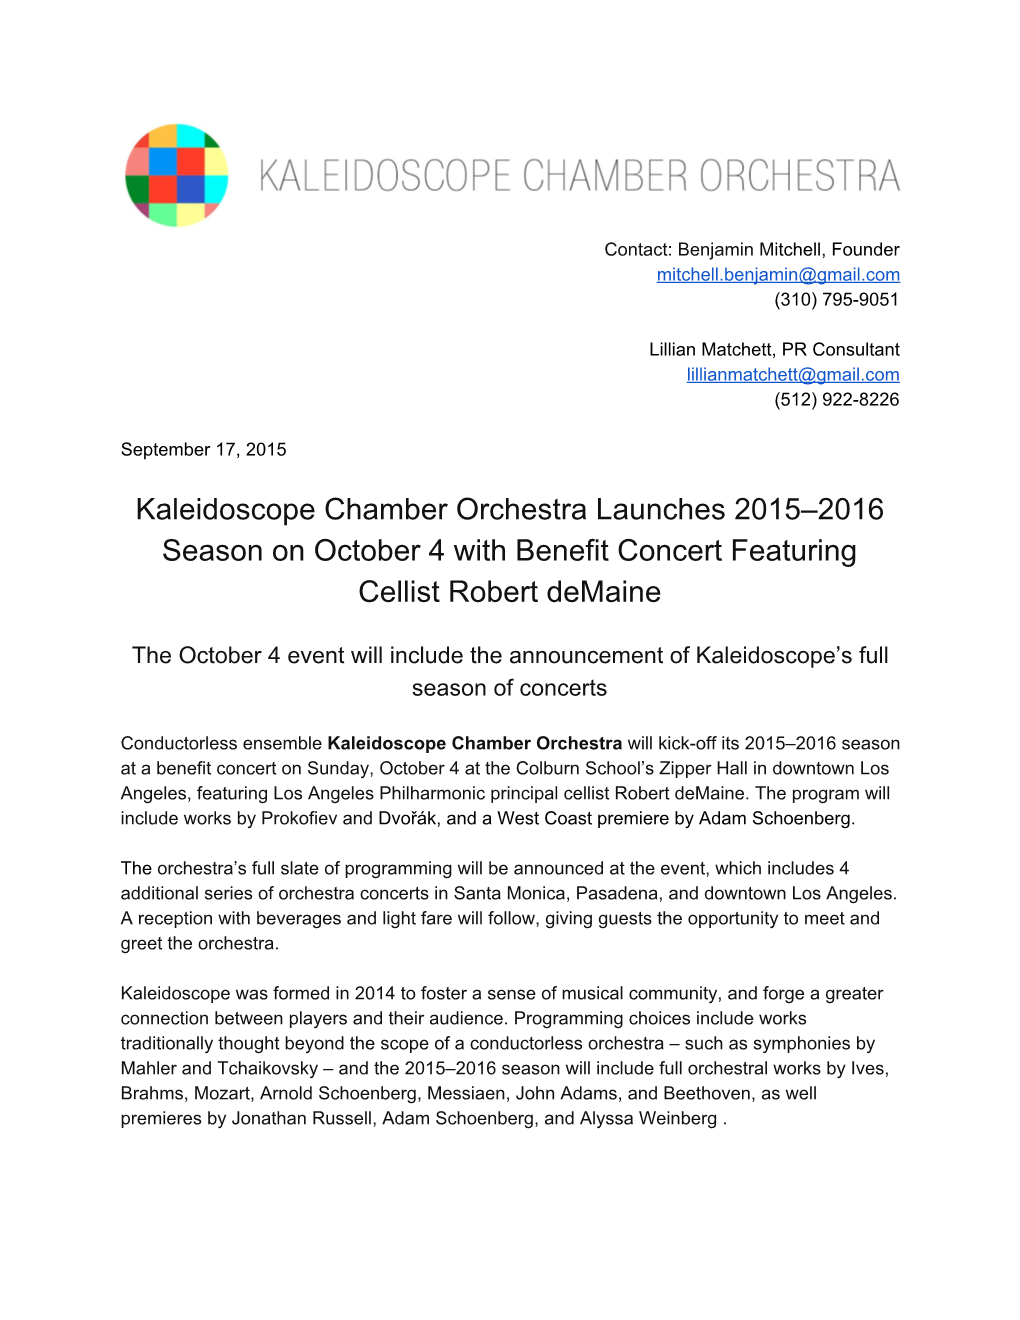 Kaleidoscope Chamber Orchestra Launches 2015–2016 Season on October 4 with Benefit Concert Featuring Cellist Robert Demaine